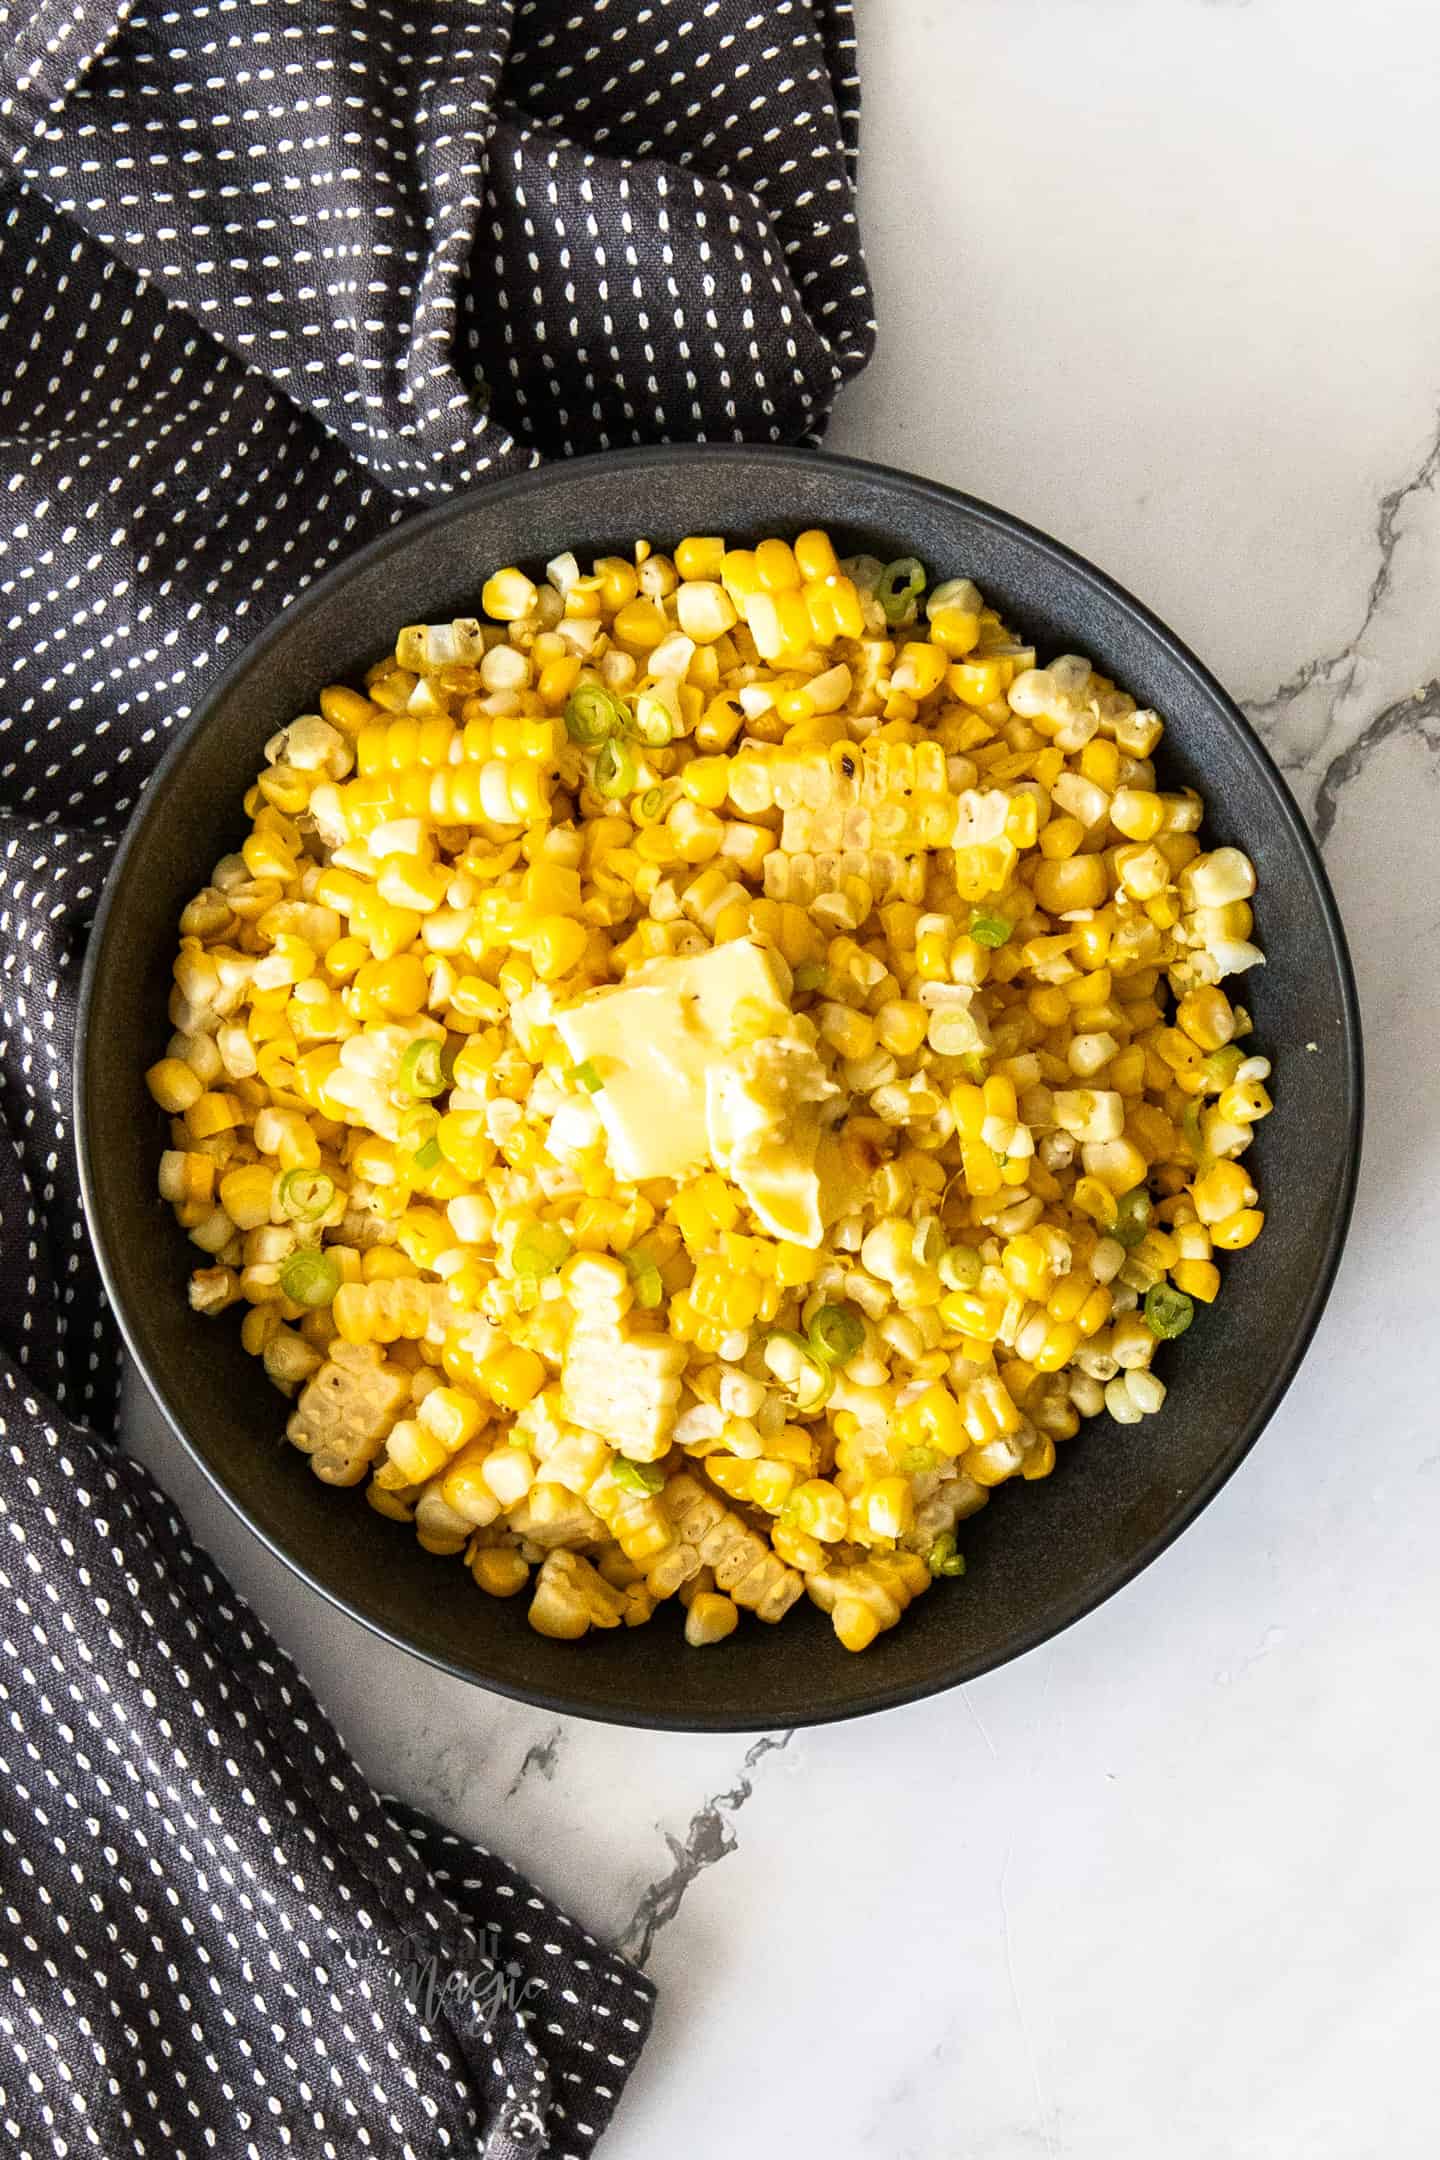 A black bowl, filled with cooked corn kernels.